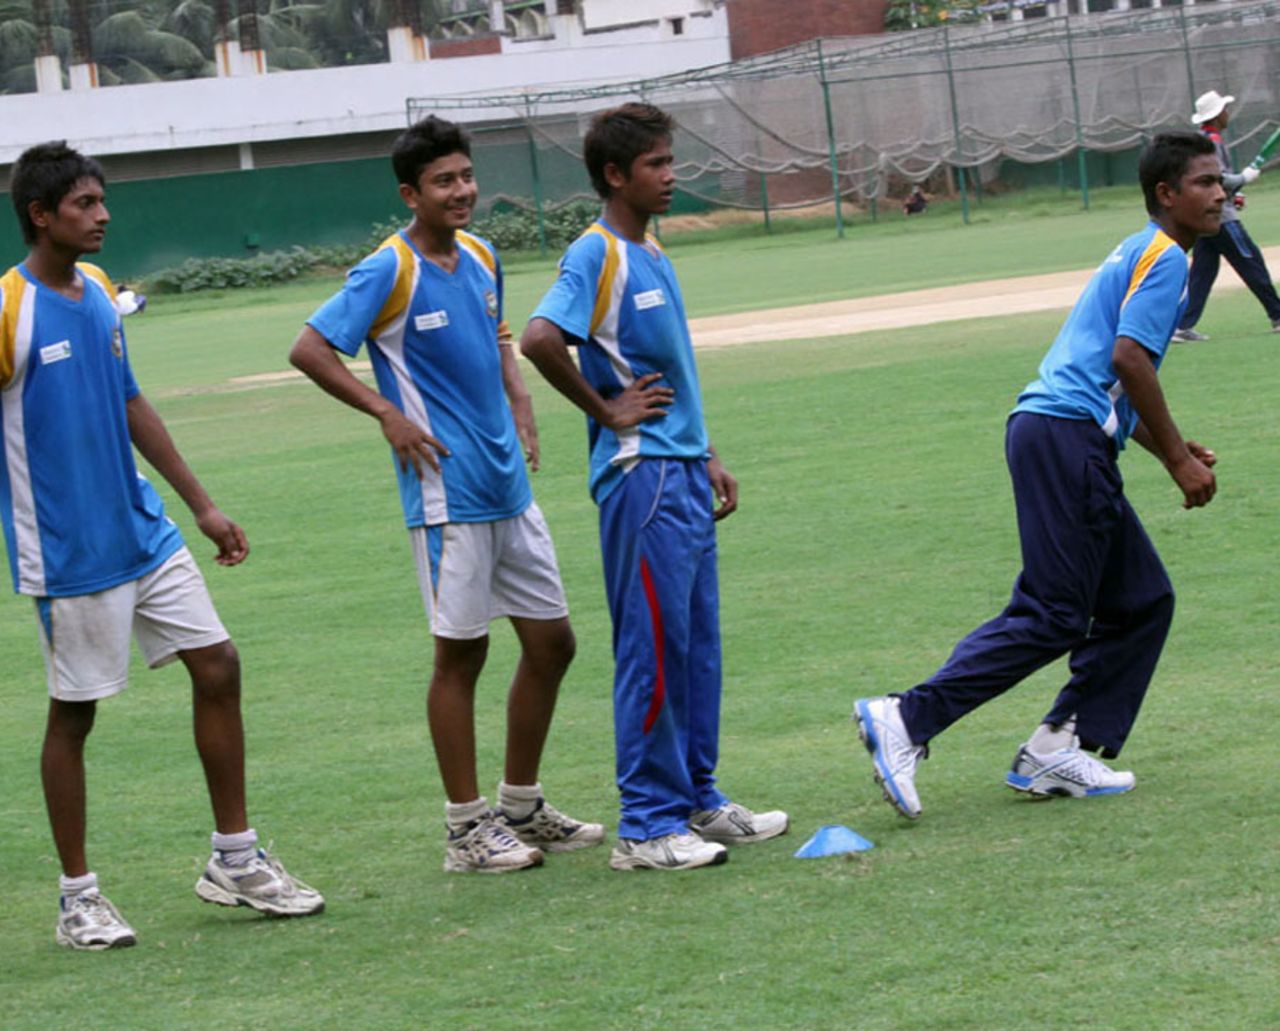 Trainees of the BCB-Standard Chartered Bank Combined Schools team at the National Cricket Academy, Mirpur, September 1, 2012